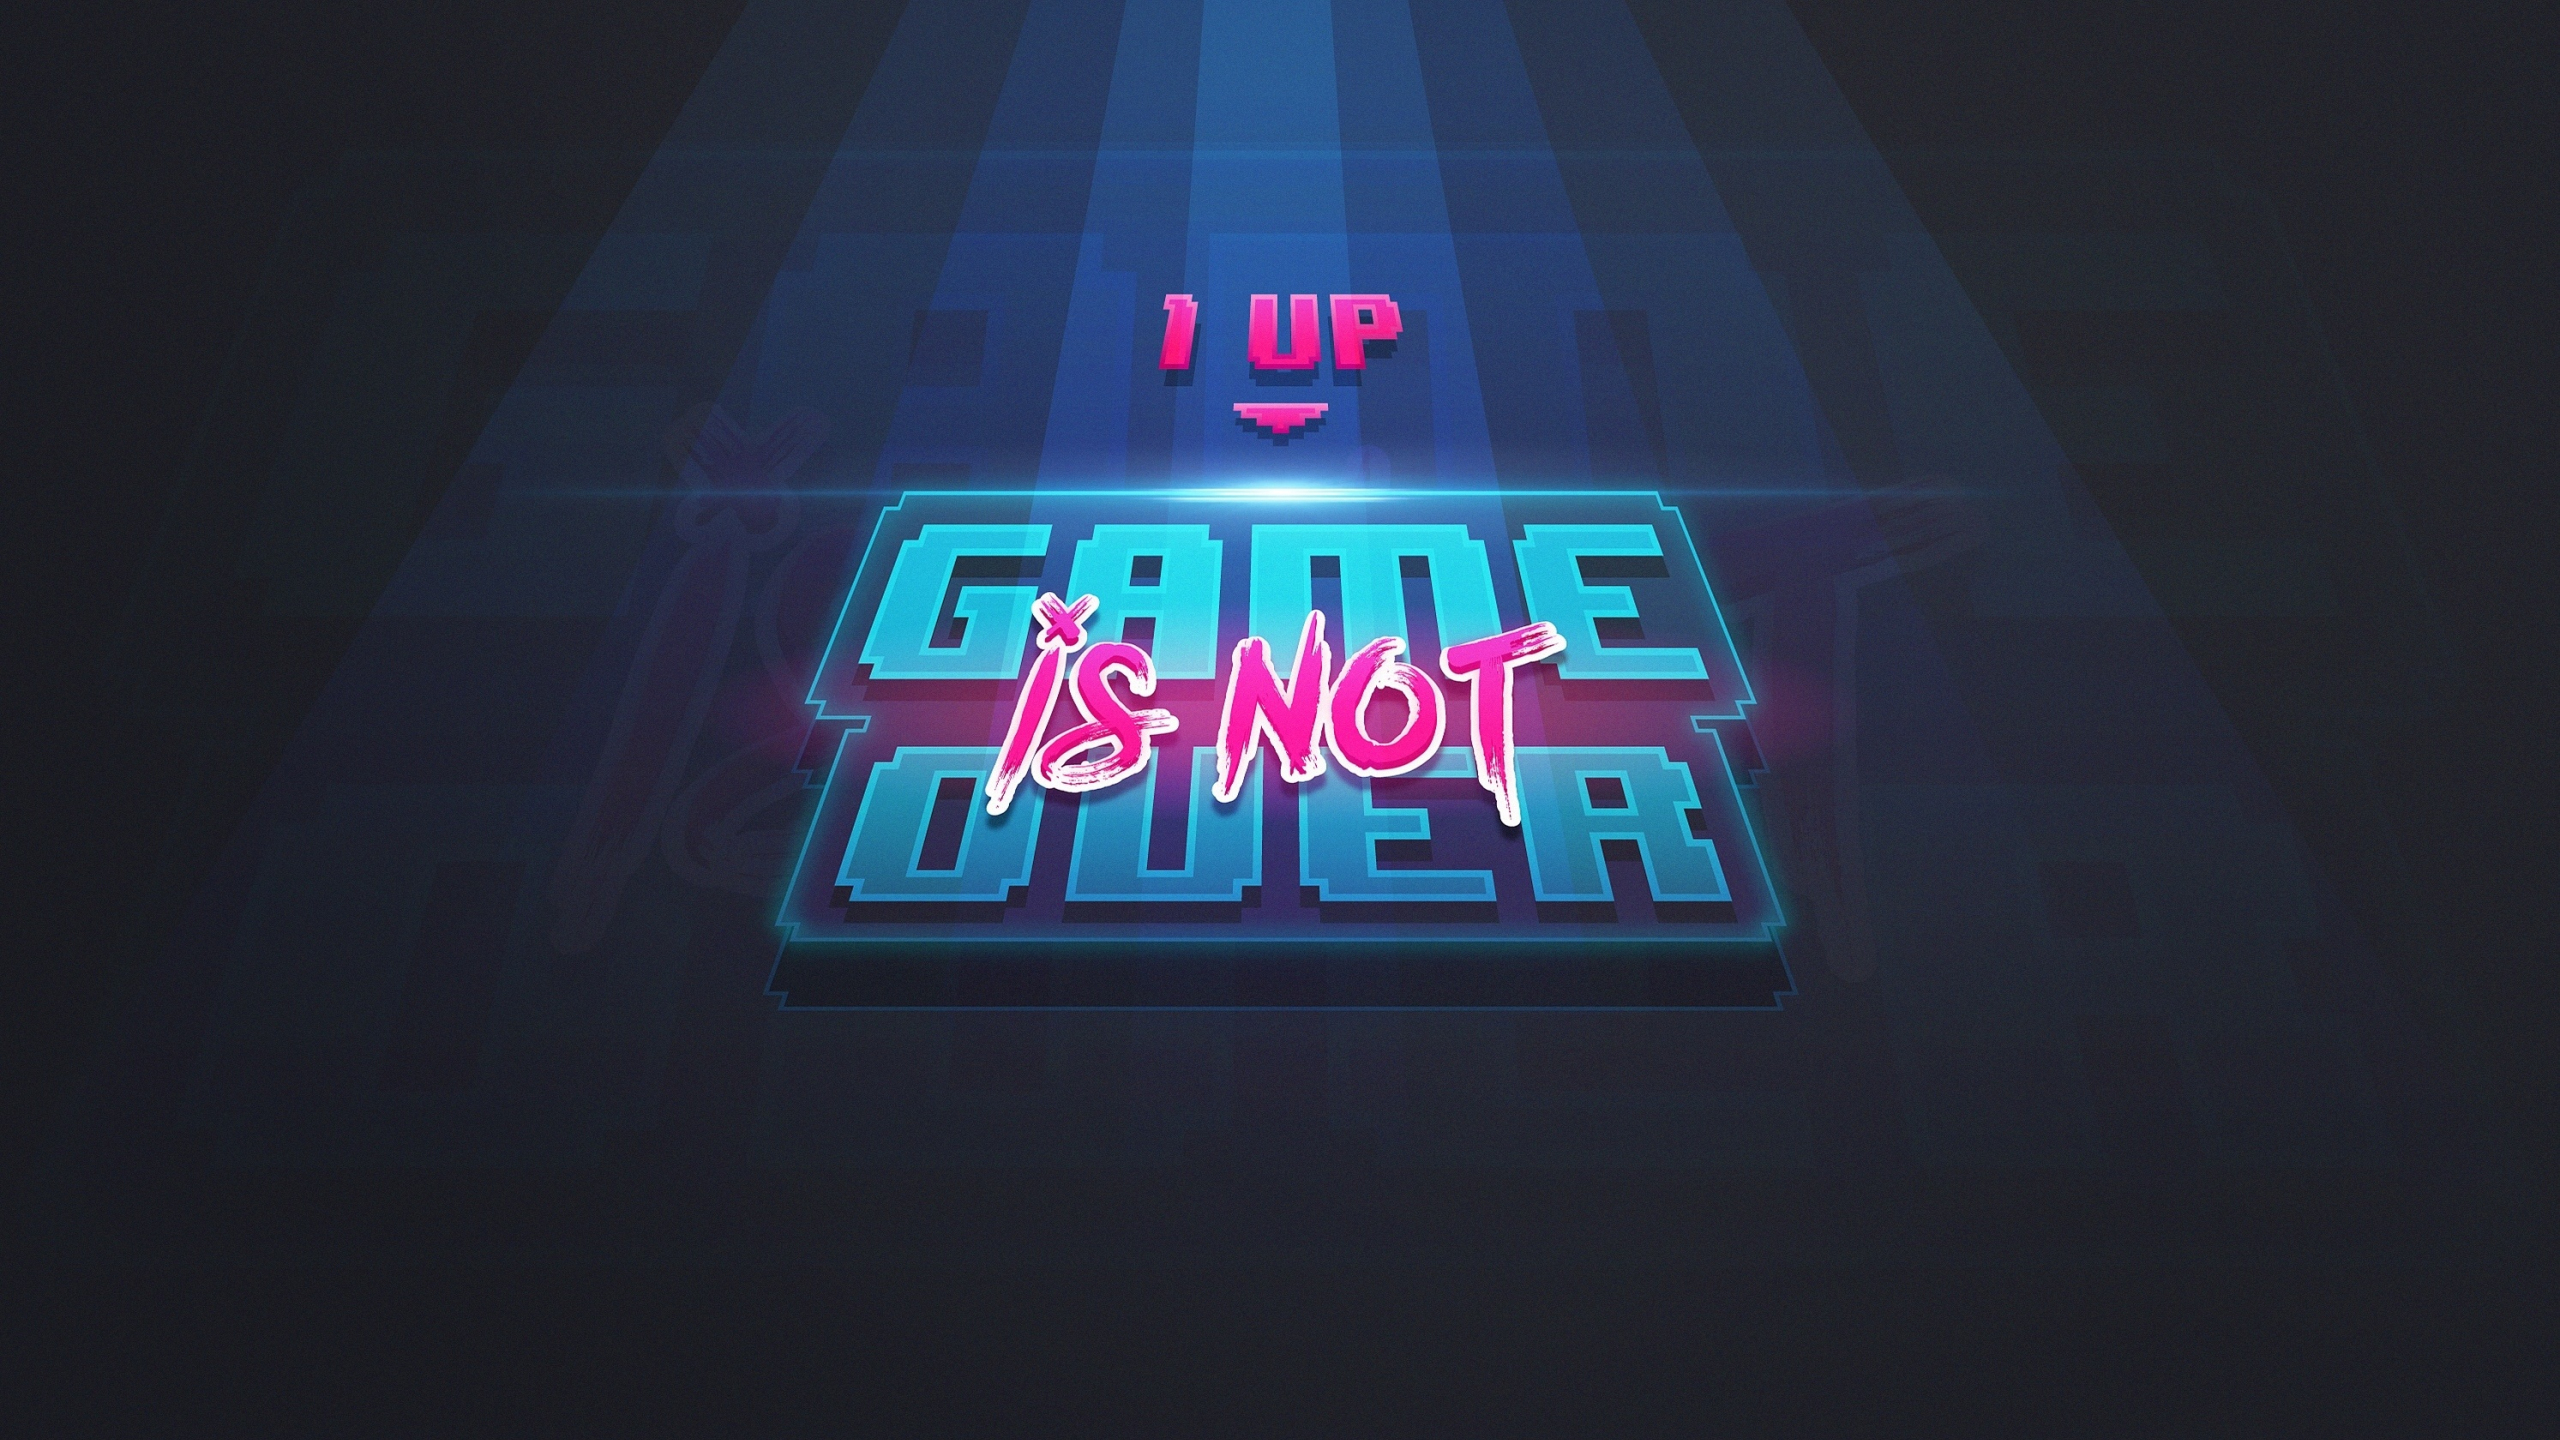 Download wallpaper 2560x1440 game over, 1 up, art, dual wide 16:9 2560x1440  hd background, 16383